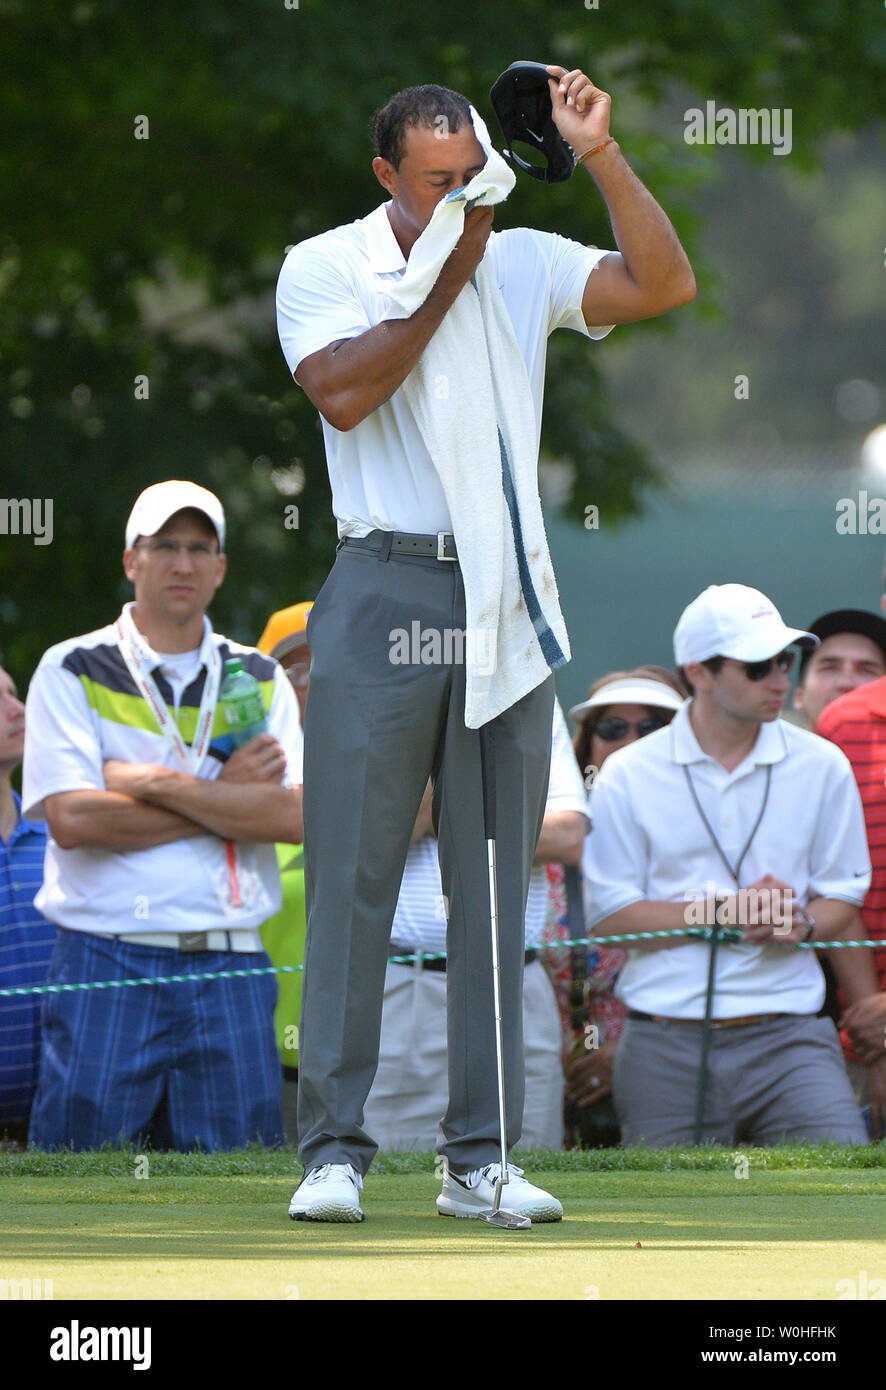 Tiger Woods wipes sweat from his face during the second round of the Quicken Loans Nationals at Congressional Country Club, in Potomac, Maryland on June 27, 2014.  UPI/Kevin Dietsch Stock Photo